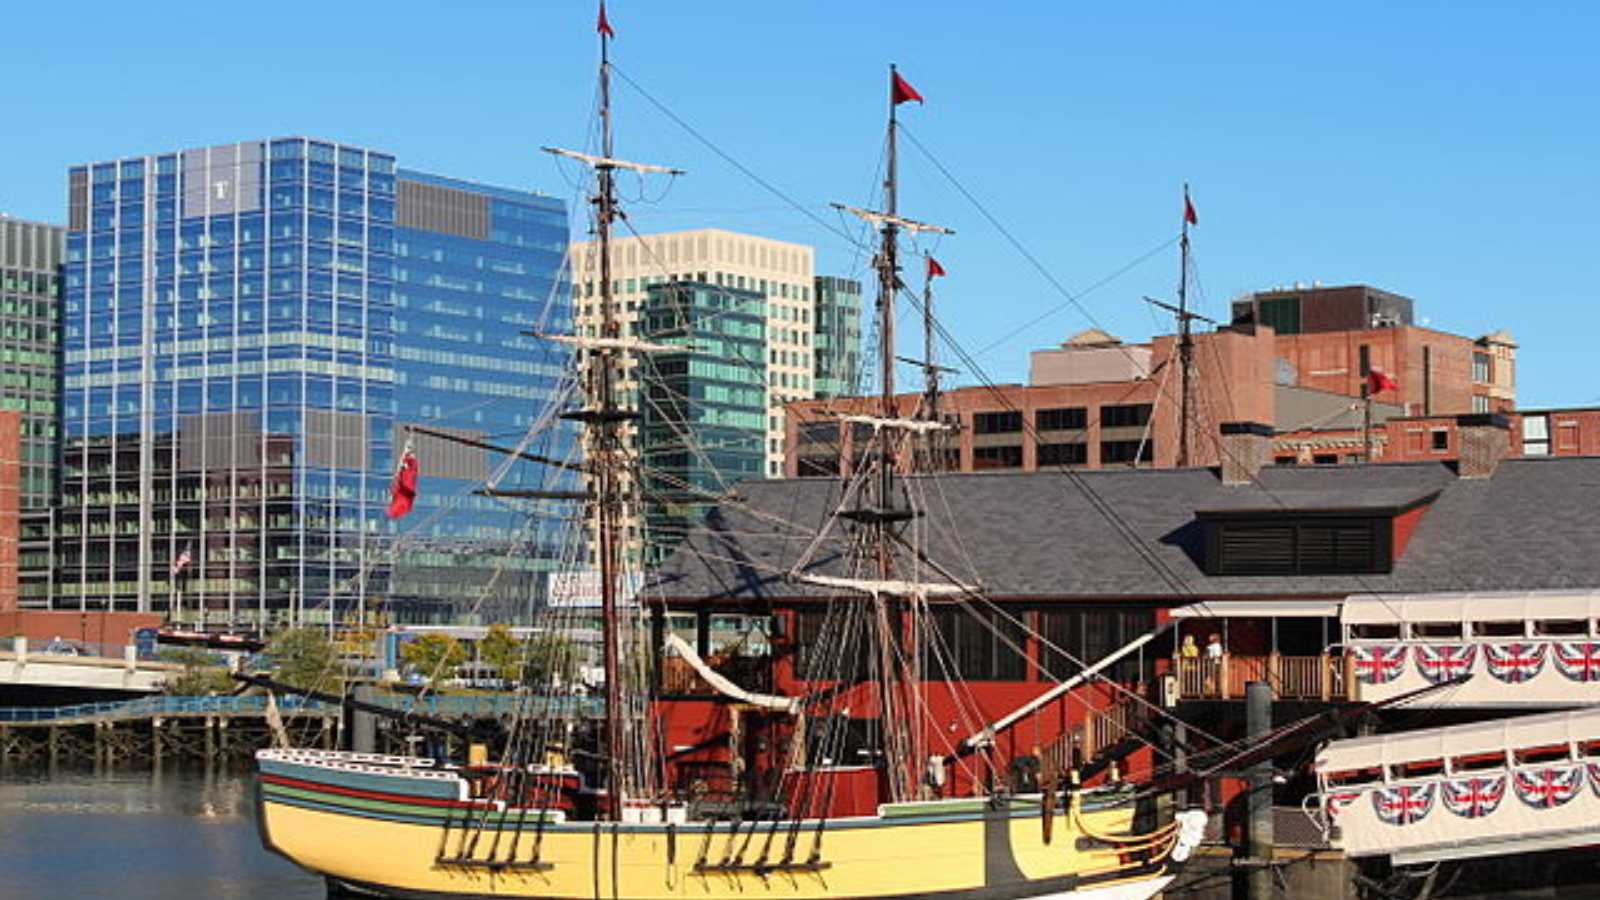 <p><span>While the Boston Tea Party Ships & Museum aims to offer a <a href="https://frenzhub.com/here-are-20-things-that-will-guide-your-visit-to-america/" rel="noopener">historical experience</a>, it often feels more commercialized than educational. Expect more gift shops than enlightenment.</span></p>